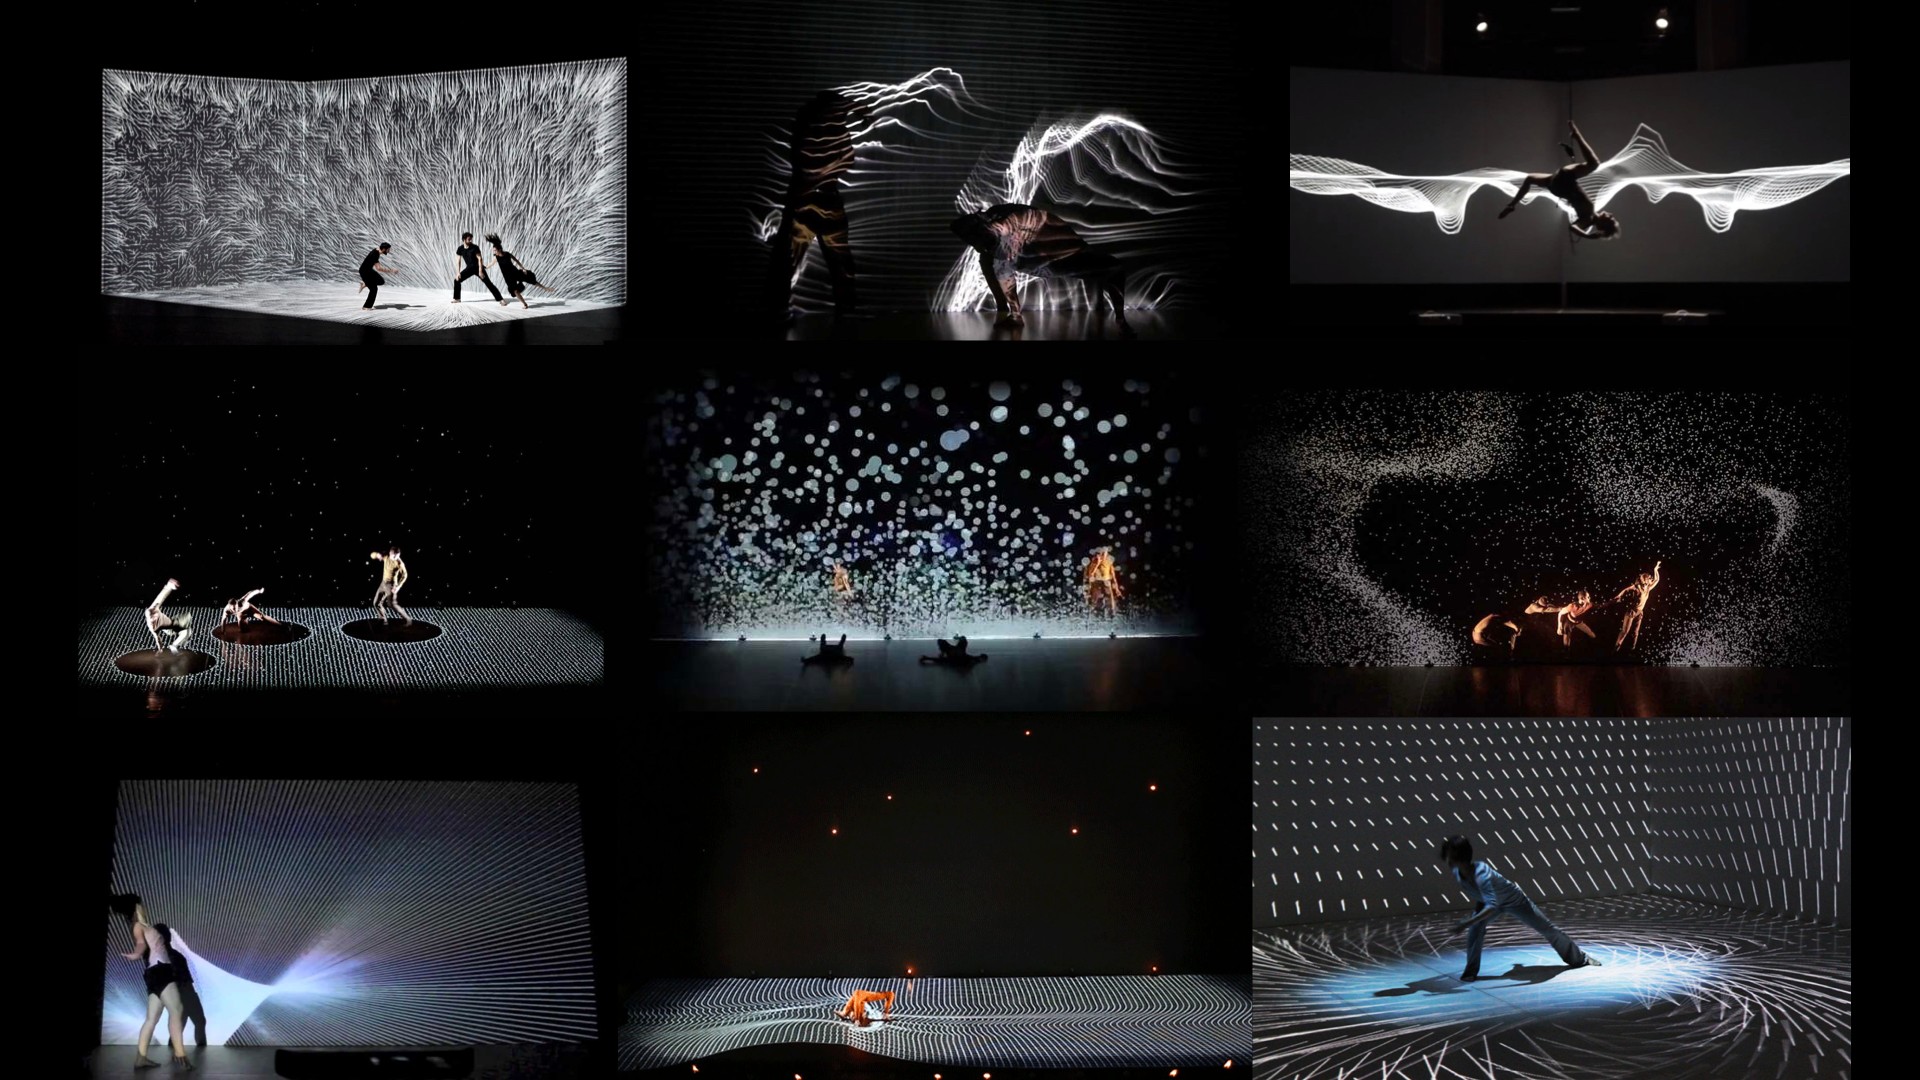 9 images of similar motion-enable projection performances.